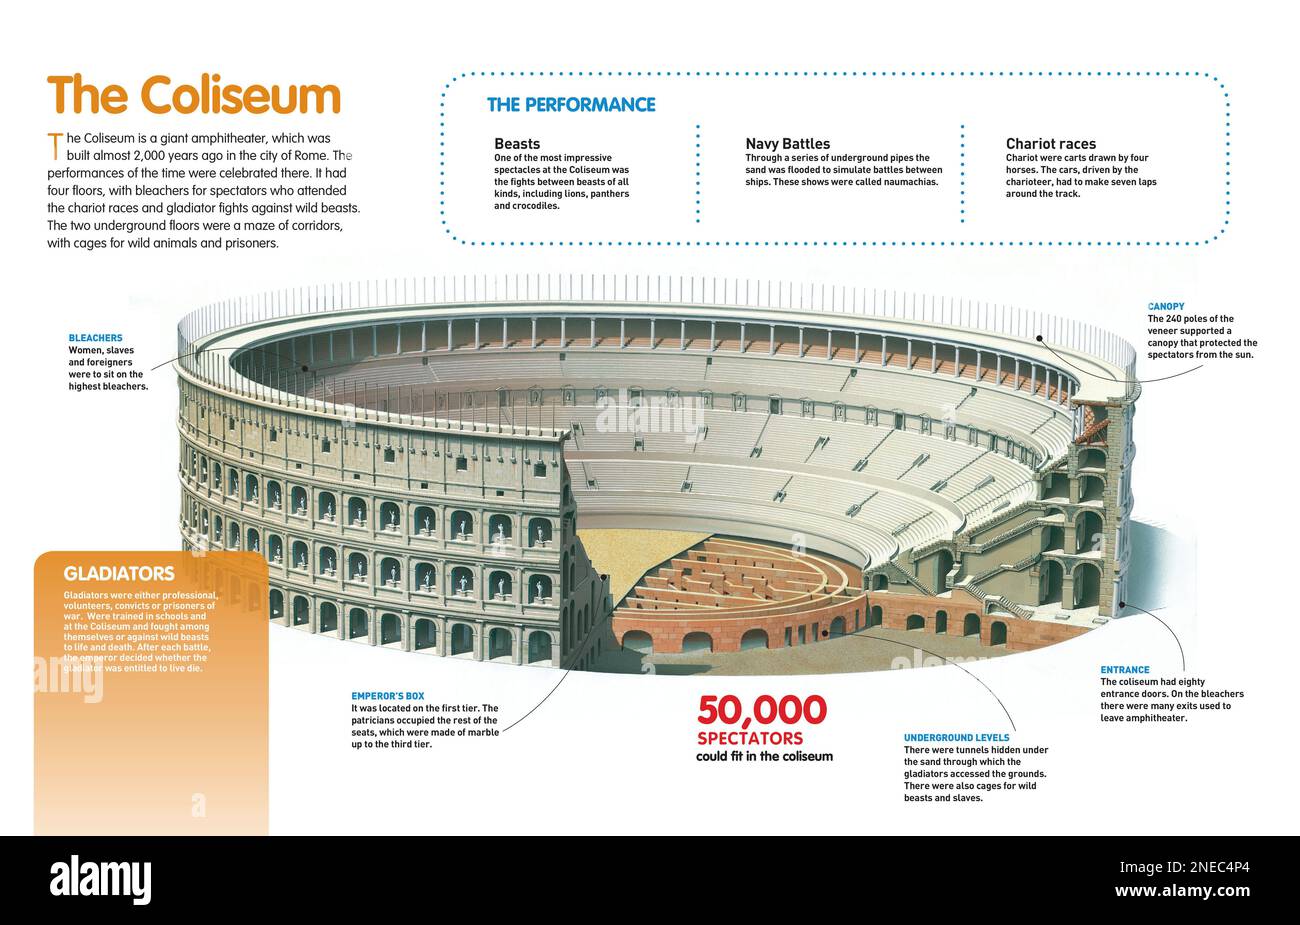 Infographic about the Roman Coliseum, destined for shows like naumachia, chariot races, and fights between gladiators and wild animals. [QuarkXPress (.qxp); Adobe InDesign (.indd); 4960x3188]. Stock Photo